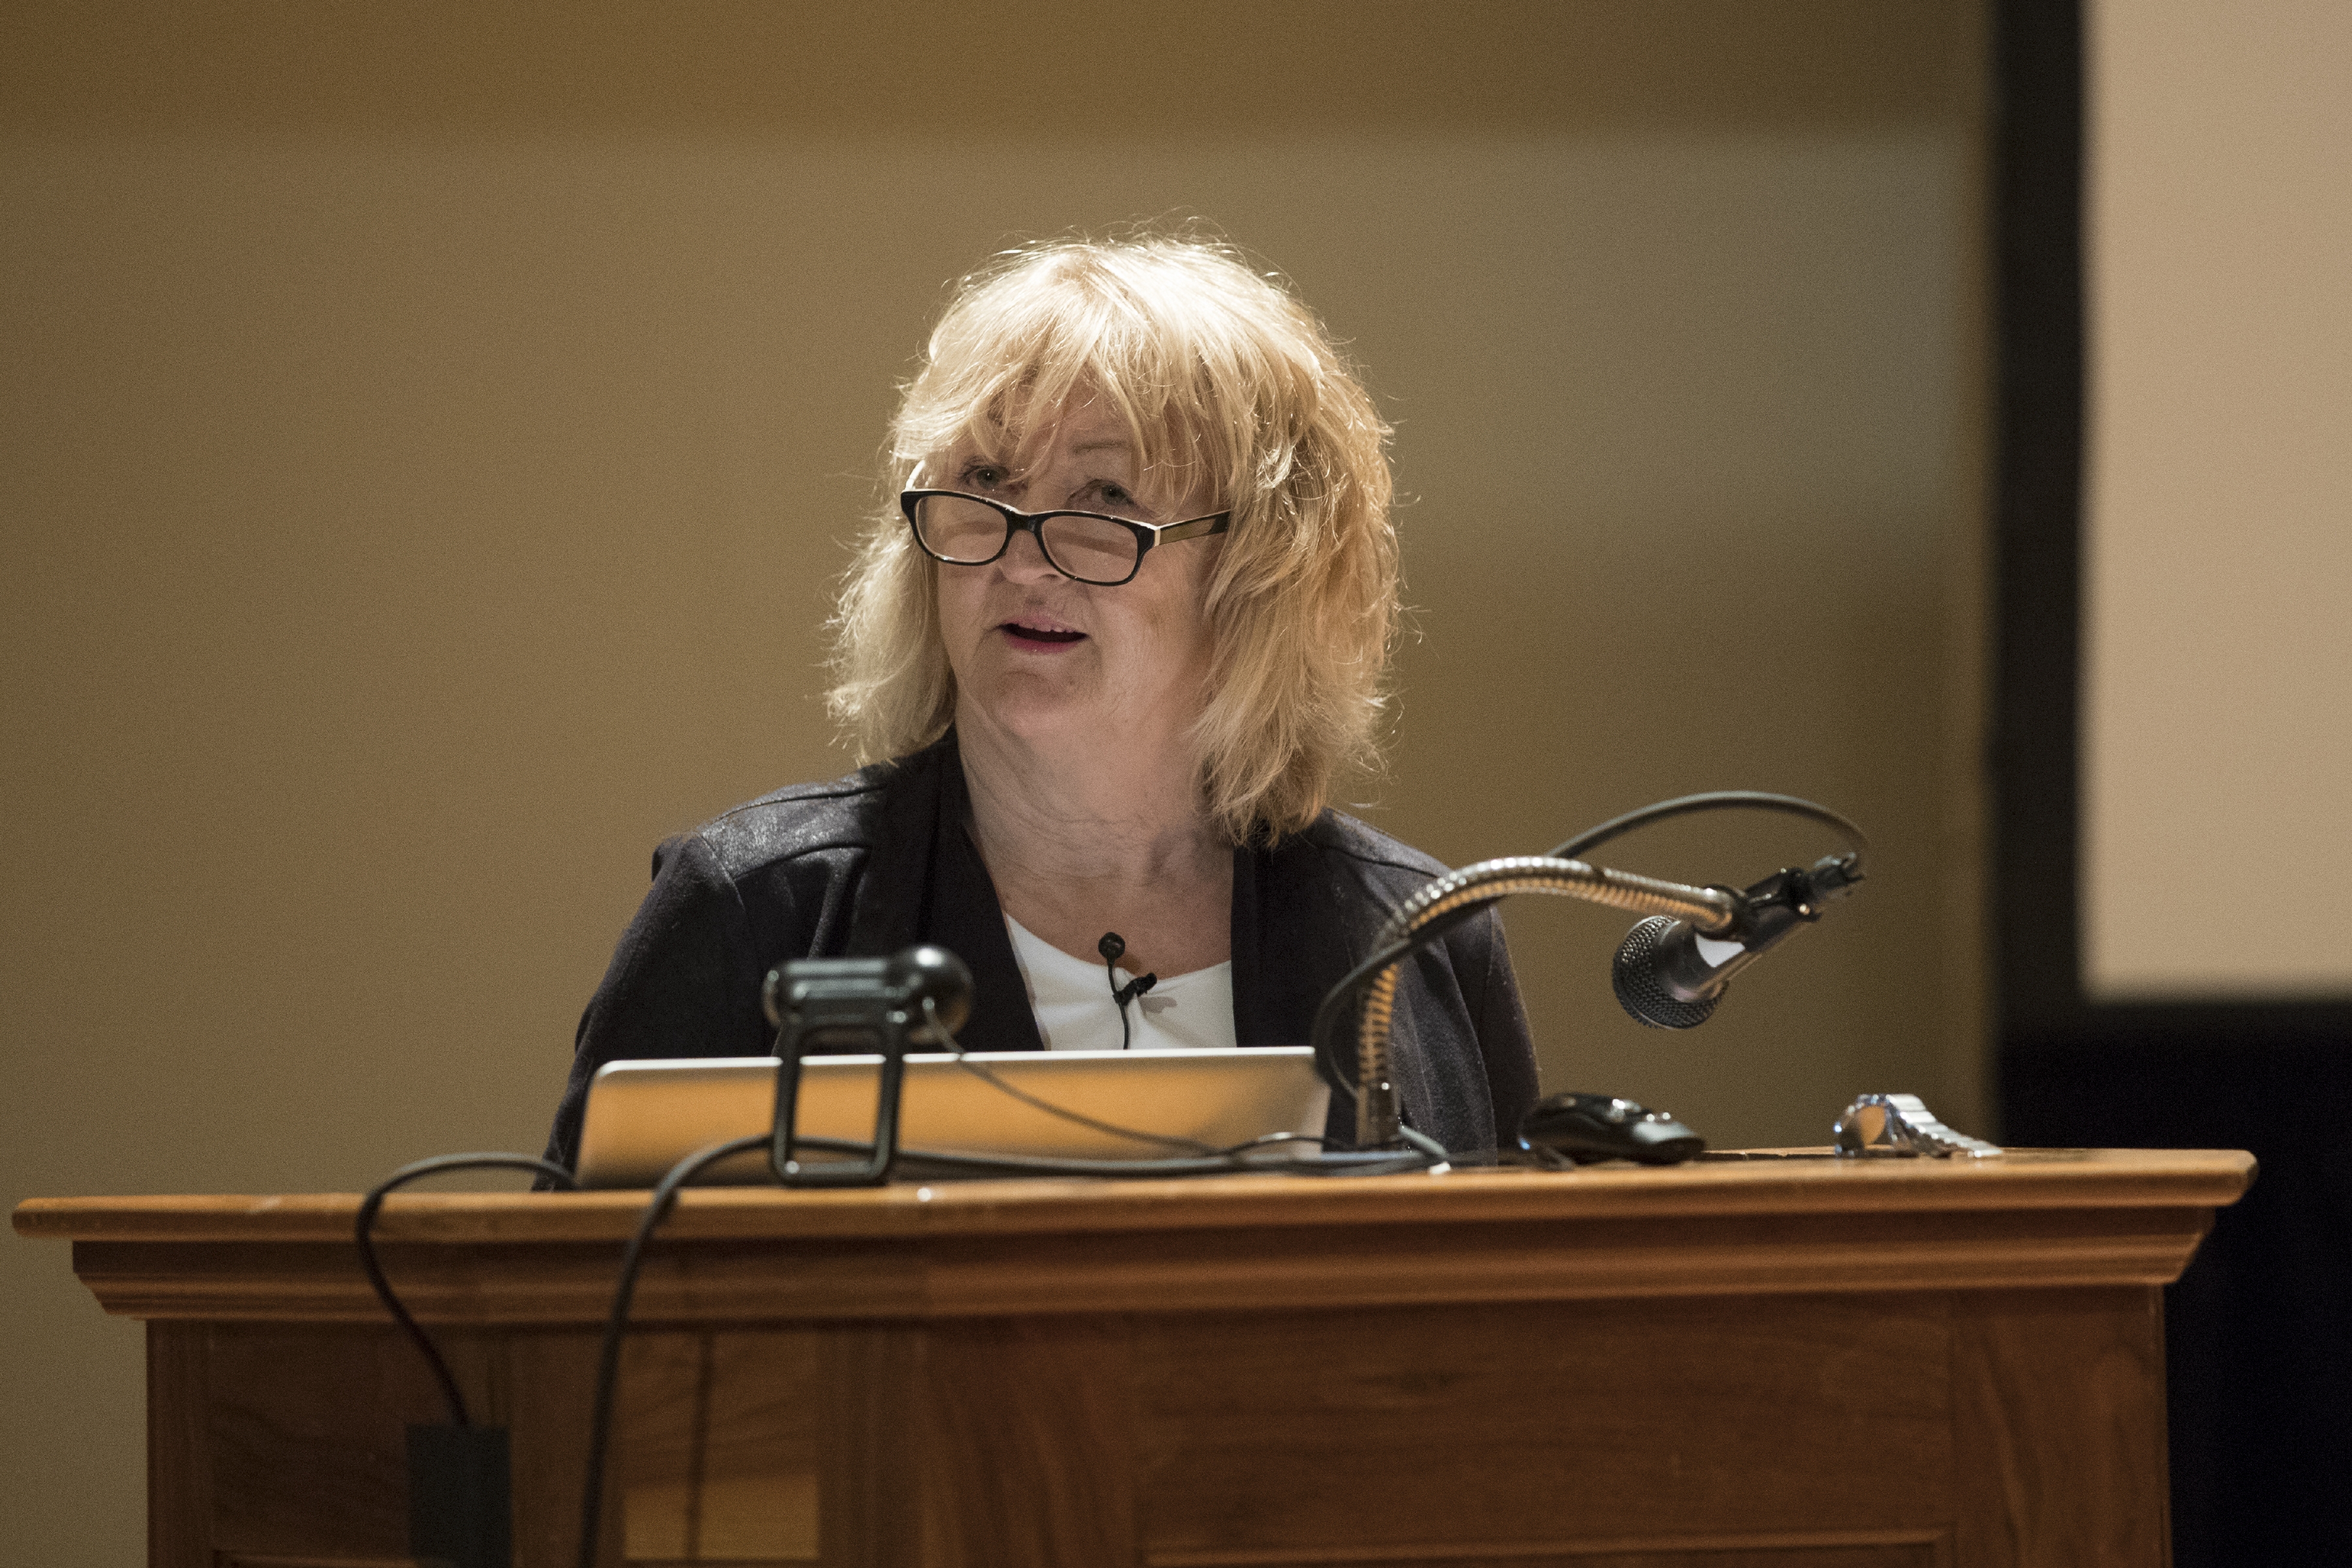 Yvonne Farrell spoke in Old Cabell Hall on Thursday. (Photo by Dan Addison, University Communications)